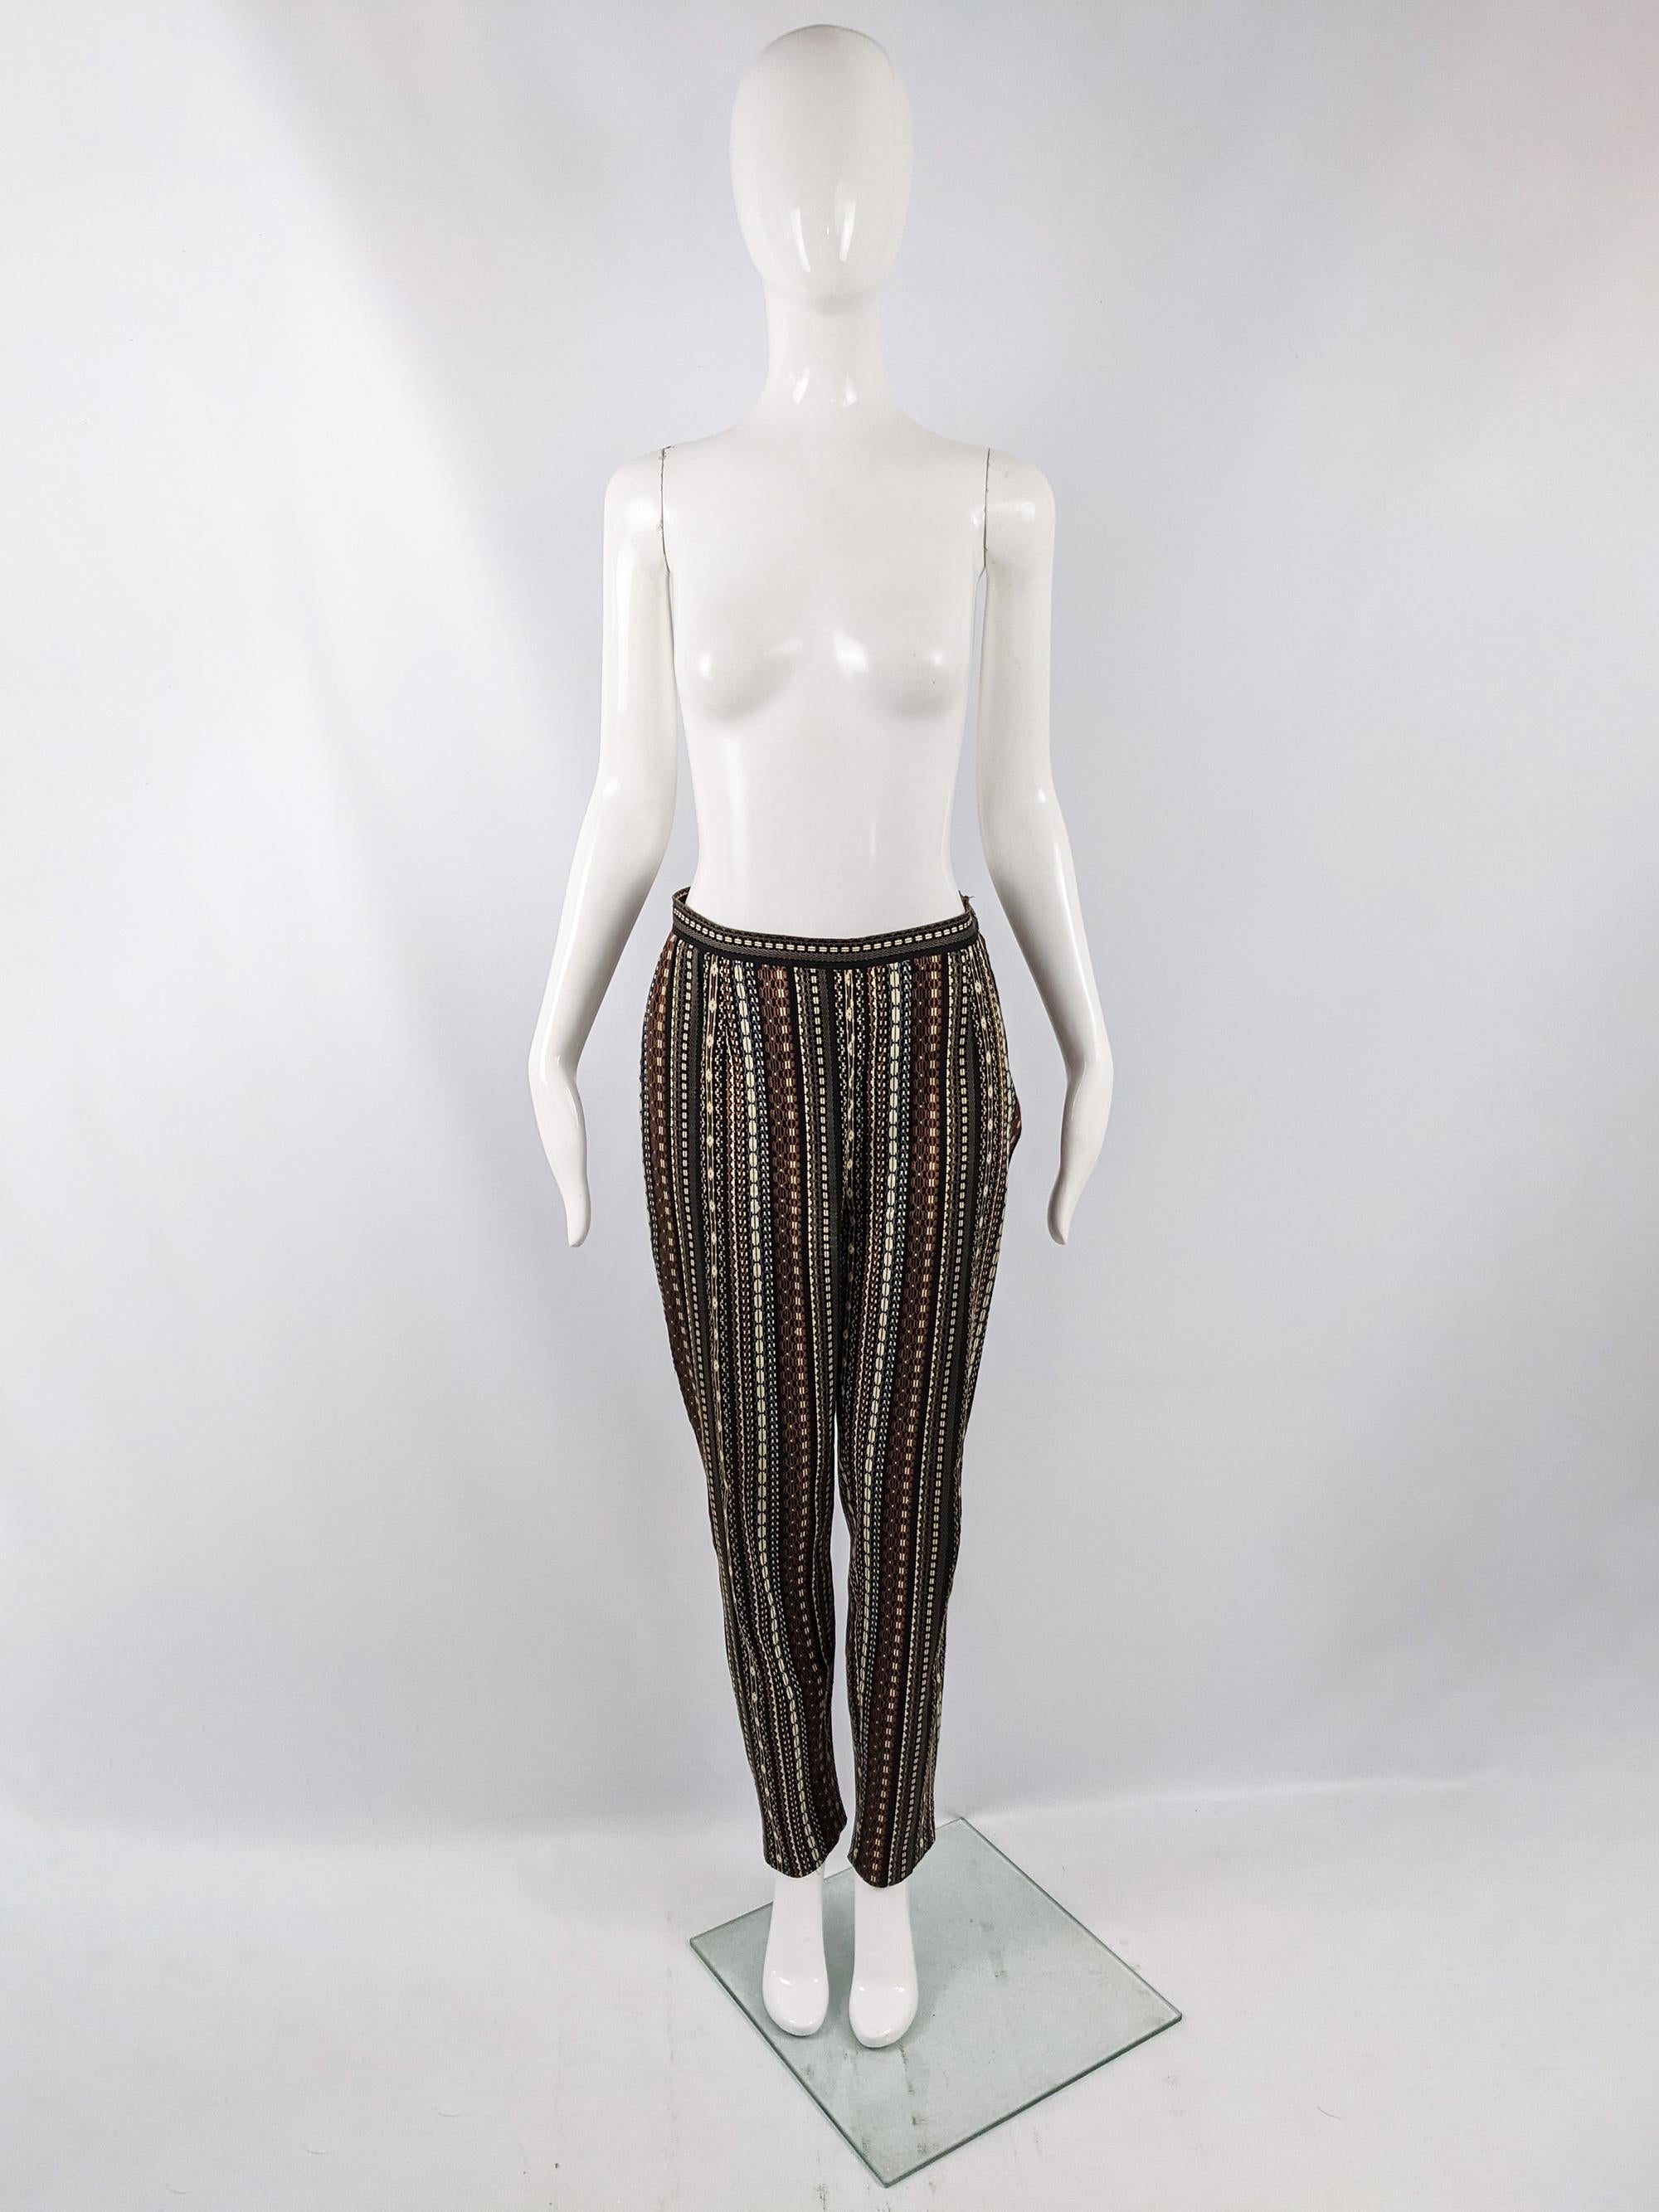 A chic pair of vintage Kenzo cigarette style pants from the 90s. Made in France, in a woven tapestry / jacquard fabric with a high waist and tapered leg. 

Size: Marked 42
Waist - 28” / 71cm
Hips - 38” / 96cm
Rise - 12” / 30cm
Inside Leg - 29” /